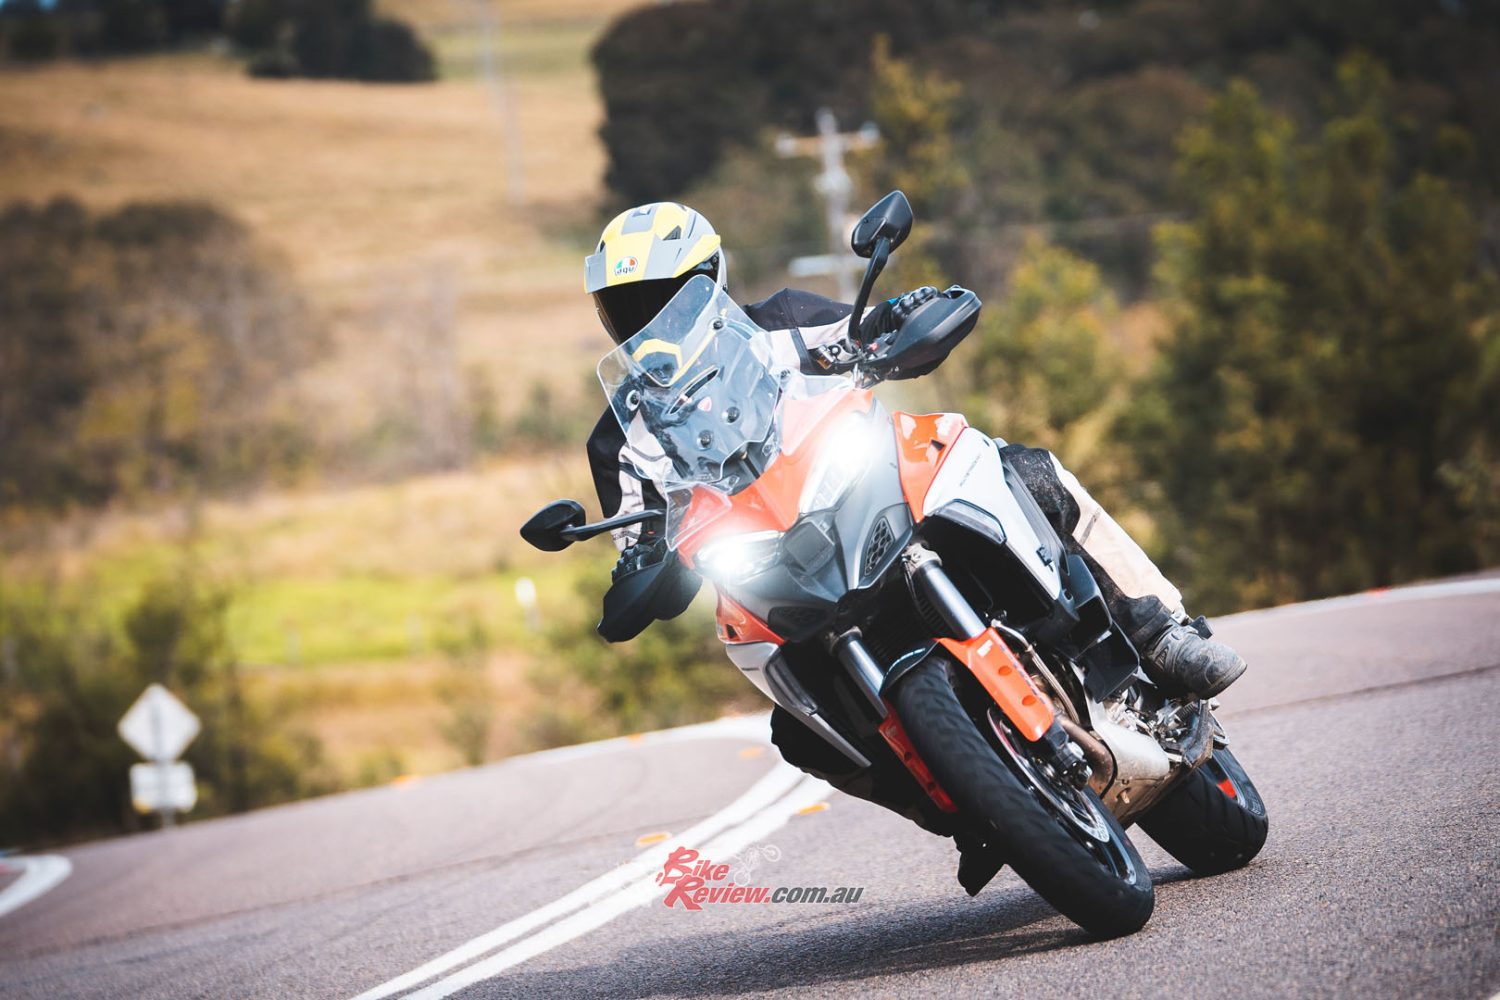 "Heading onto the road, the Multistrada felt in its element and I could easily imagine taking off around Australia."